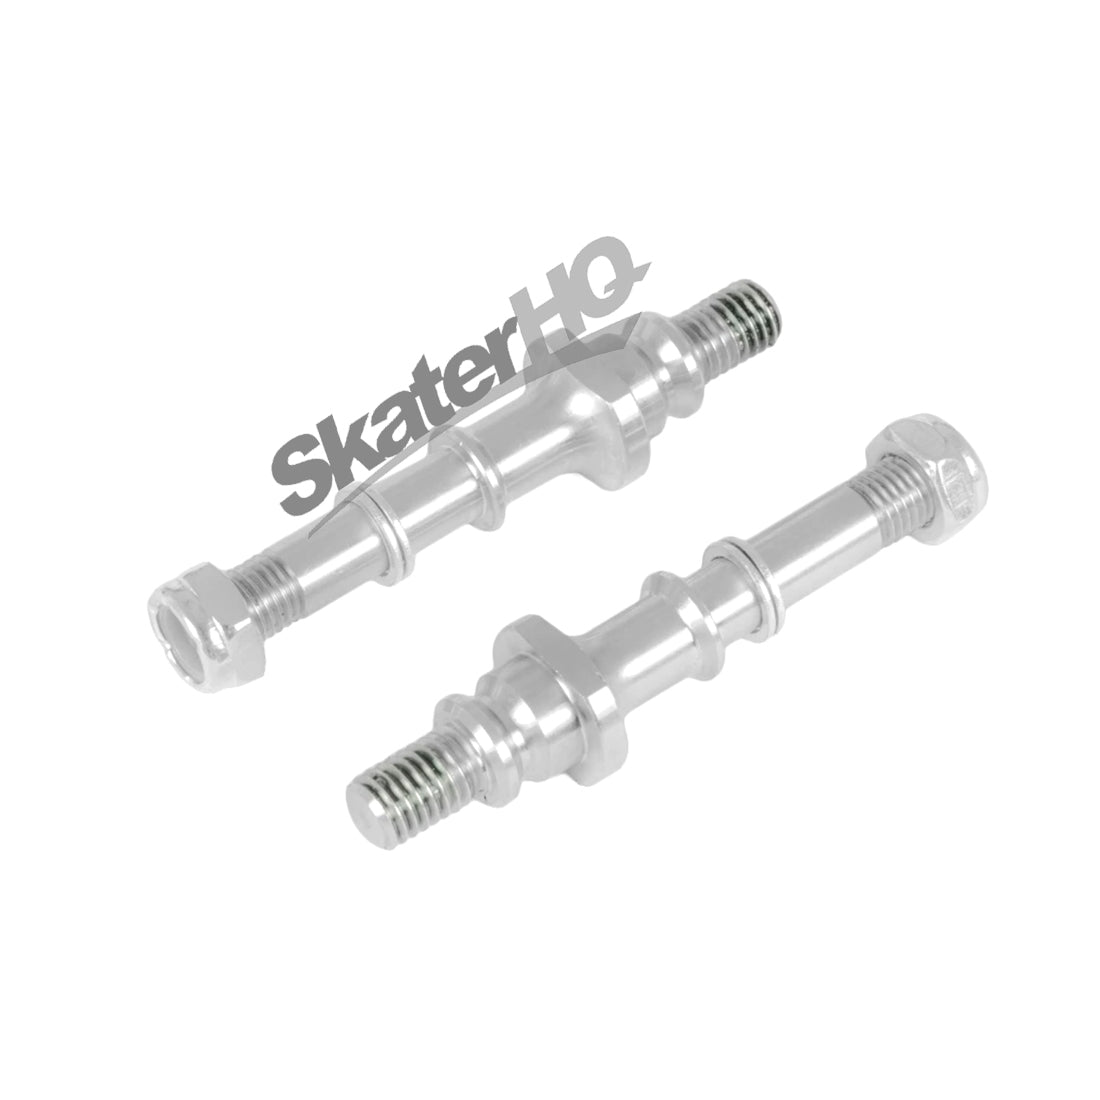 Chaya XTNDR Axle Pair - 67mm Roller Skate Hardware and Parts